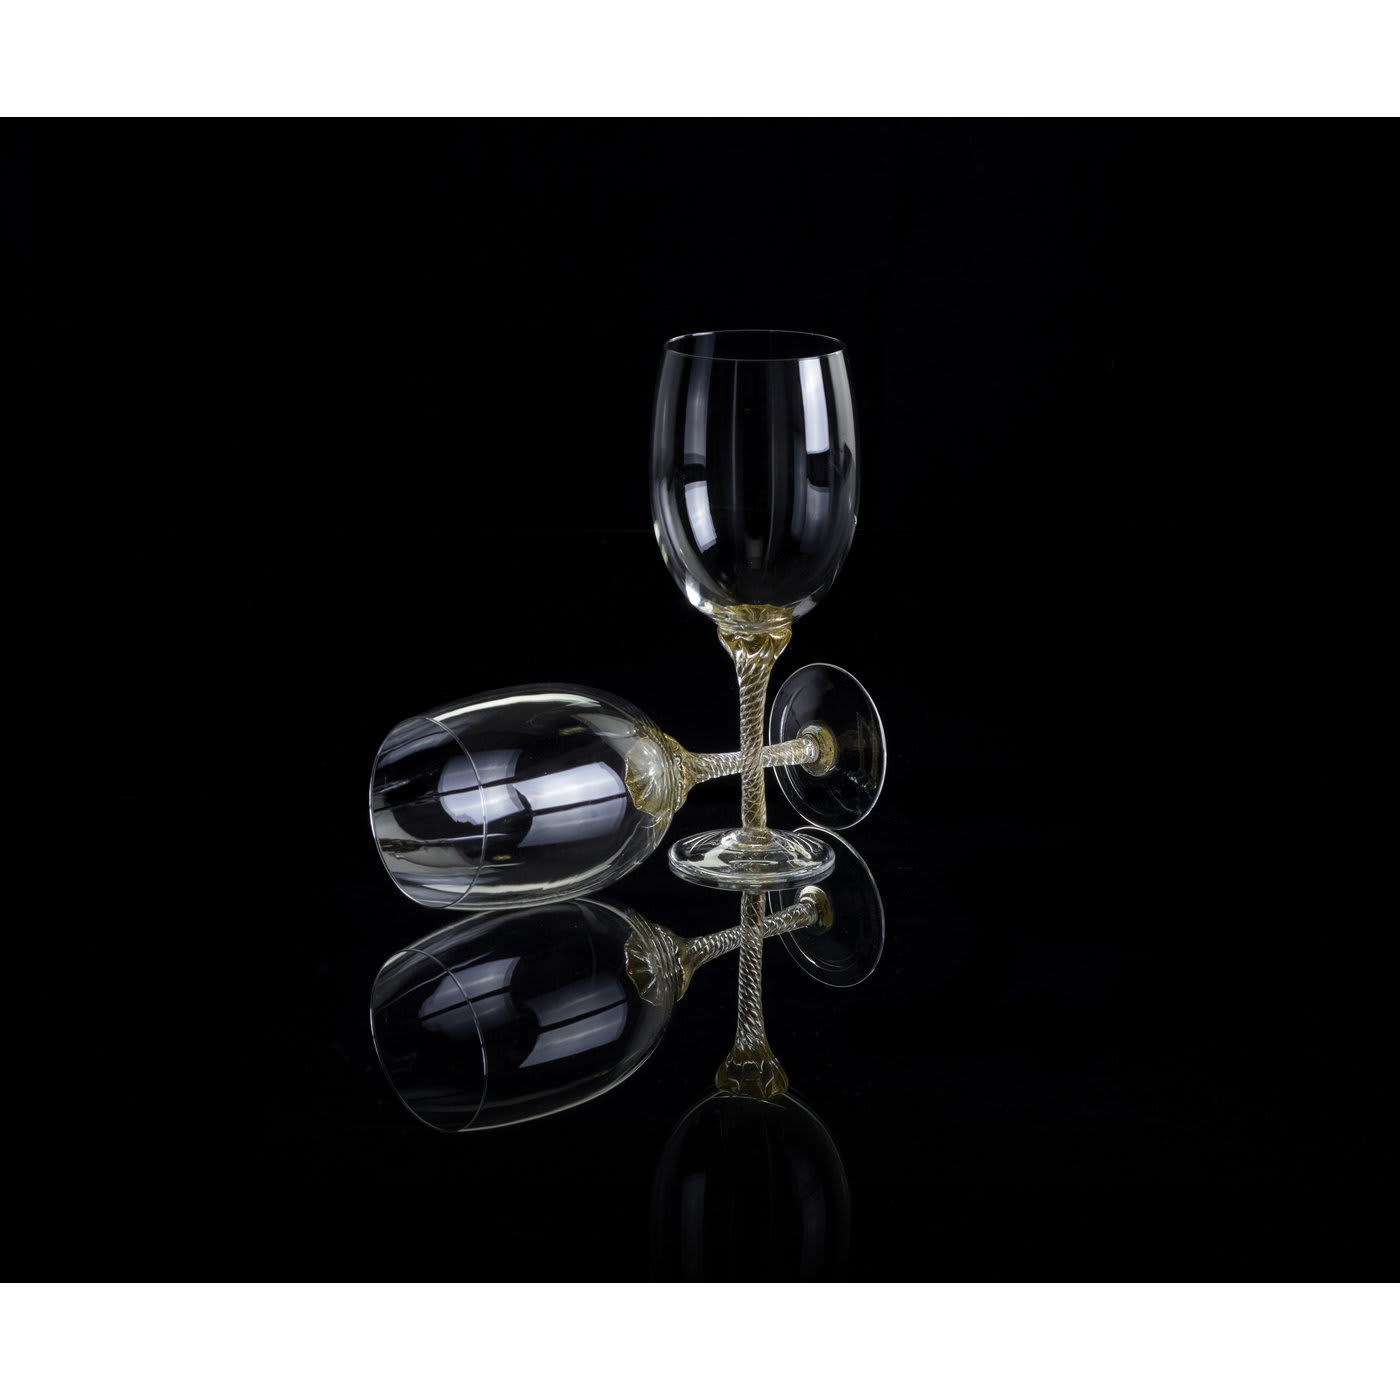 Artemisia Small Goblet in Murano Glass and Gold Leaf 24K - Mara Dal Cin for DFN